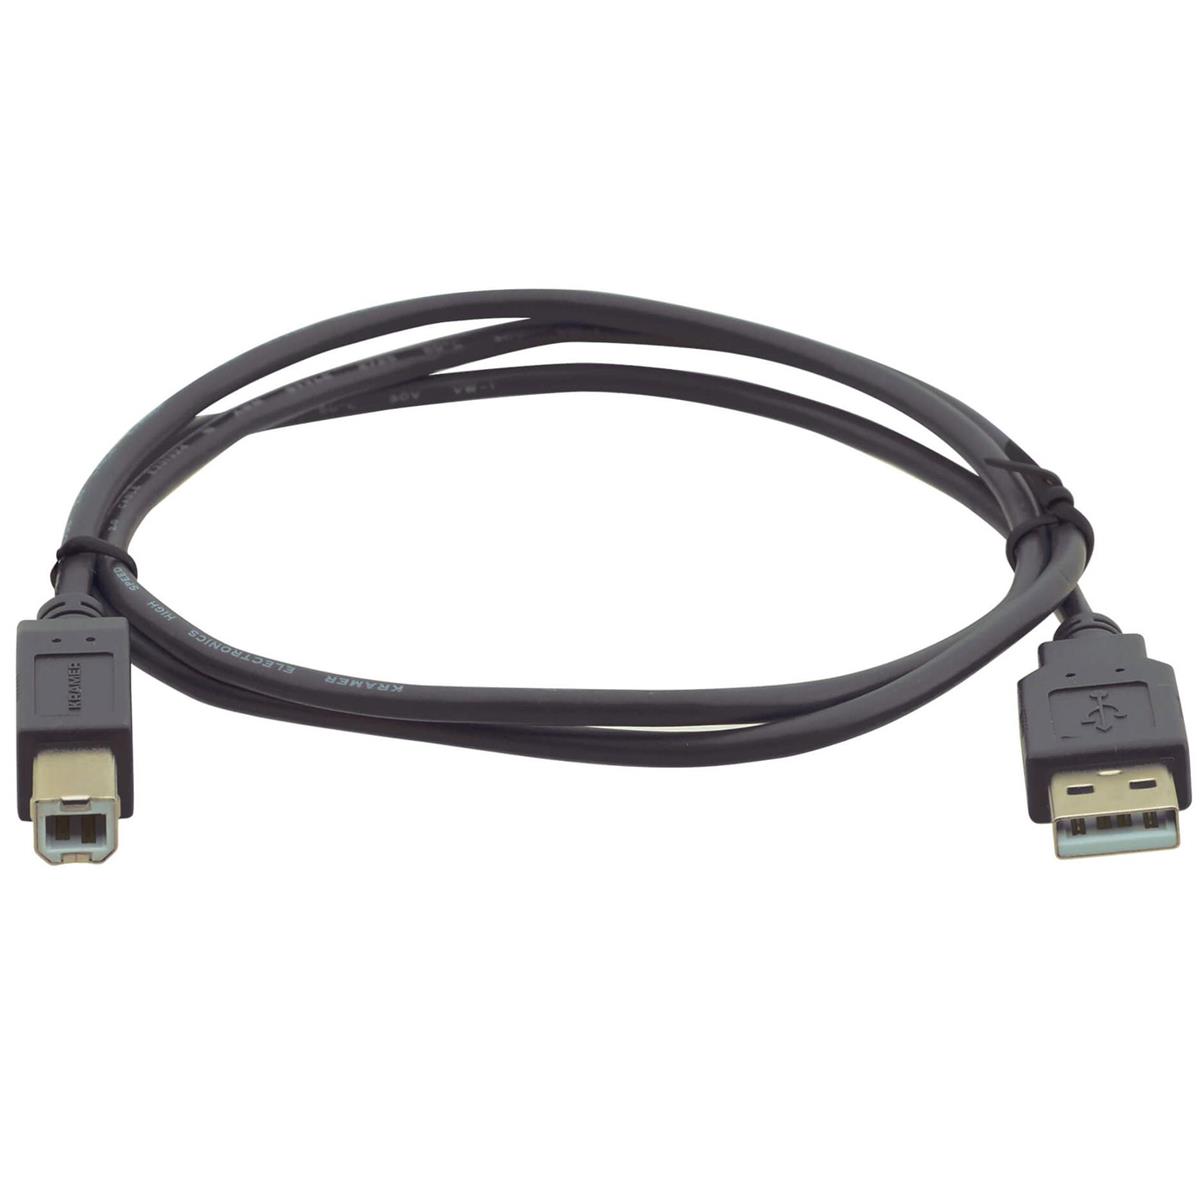 Image of Kramer Electronics 6' USB Type-A Male to USB Type-B Male Cable